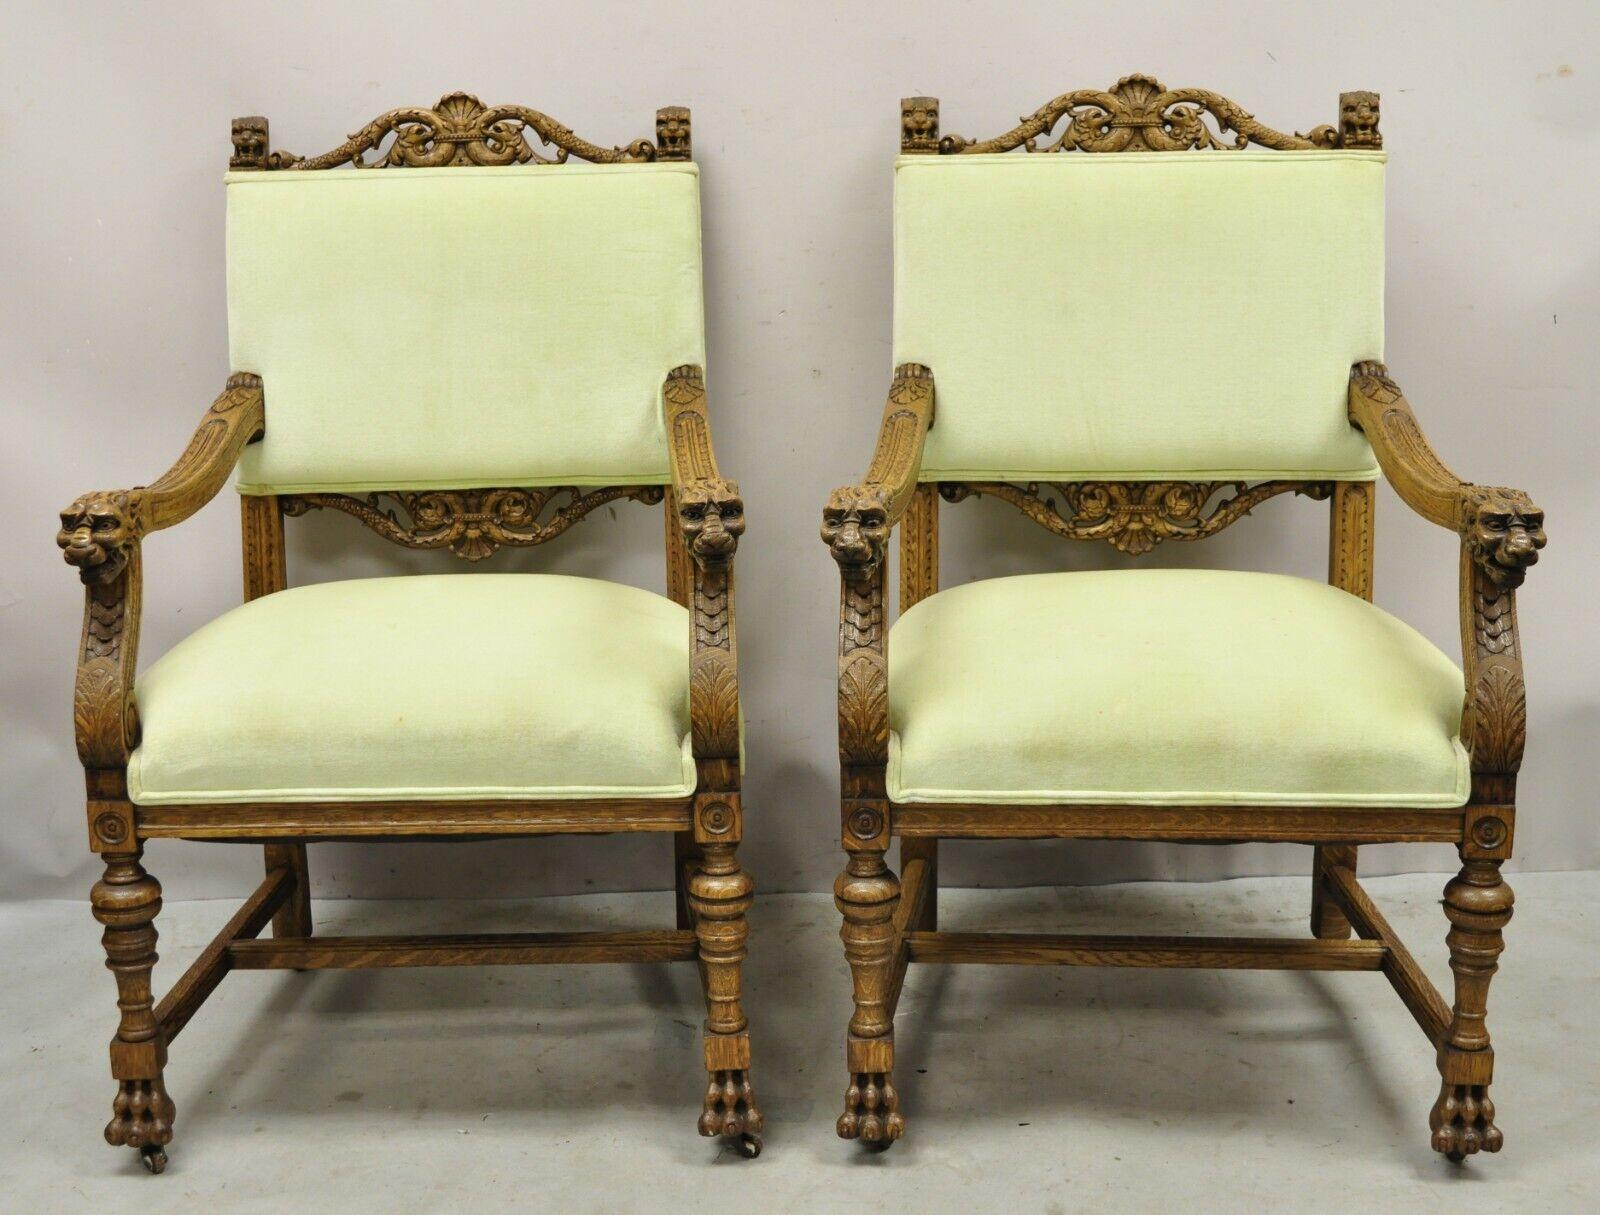 Antique Italian Renaissance Carved Oak Wood Lion Head Paw Feet Arm Chairs - Pair. Item features wonderfully carved details, green upholstery, very nice antique pair. Circa 1900. Measurements: 43